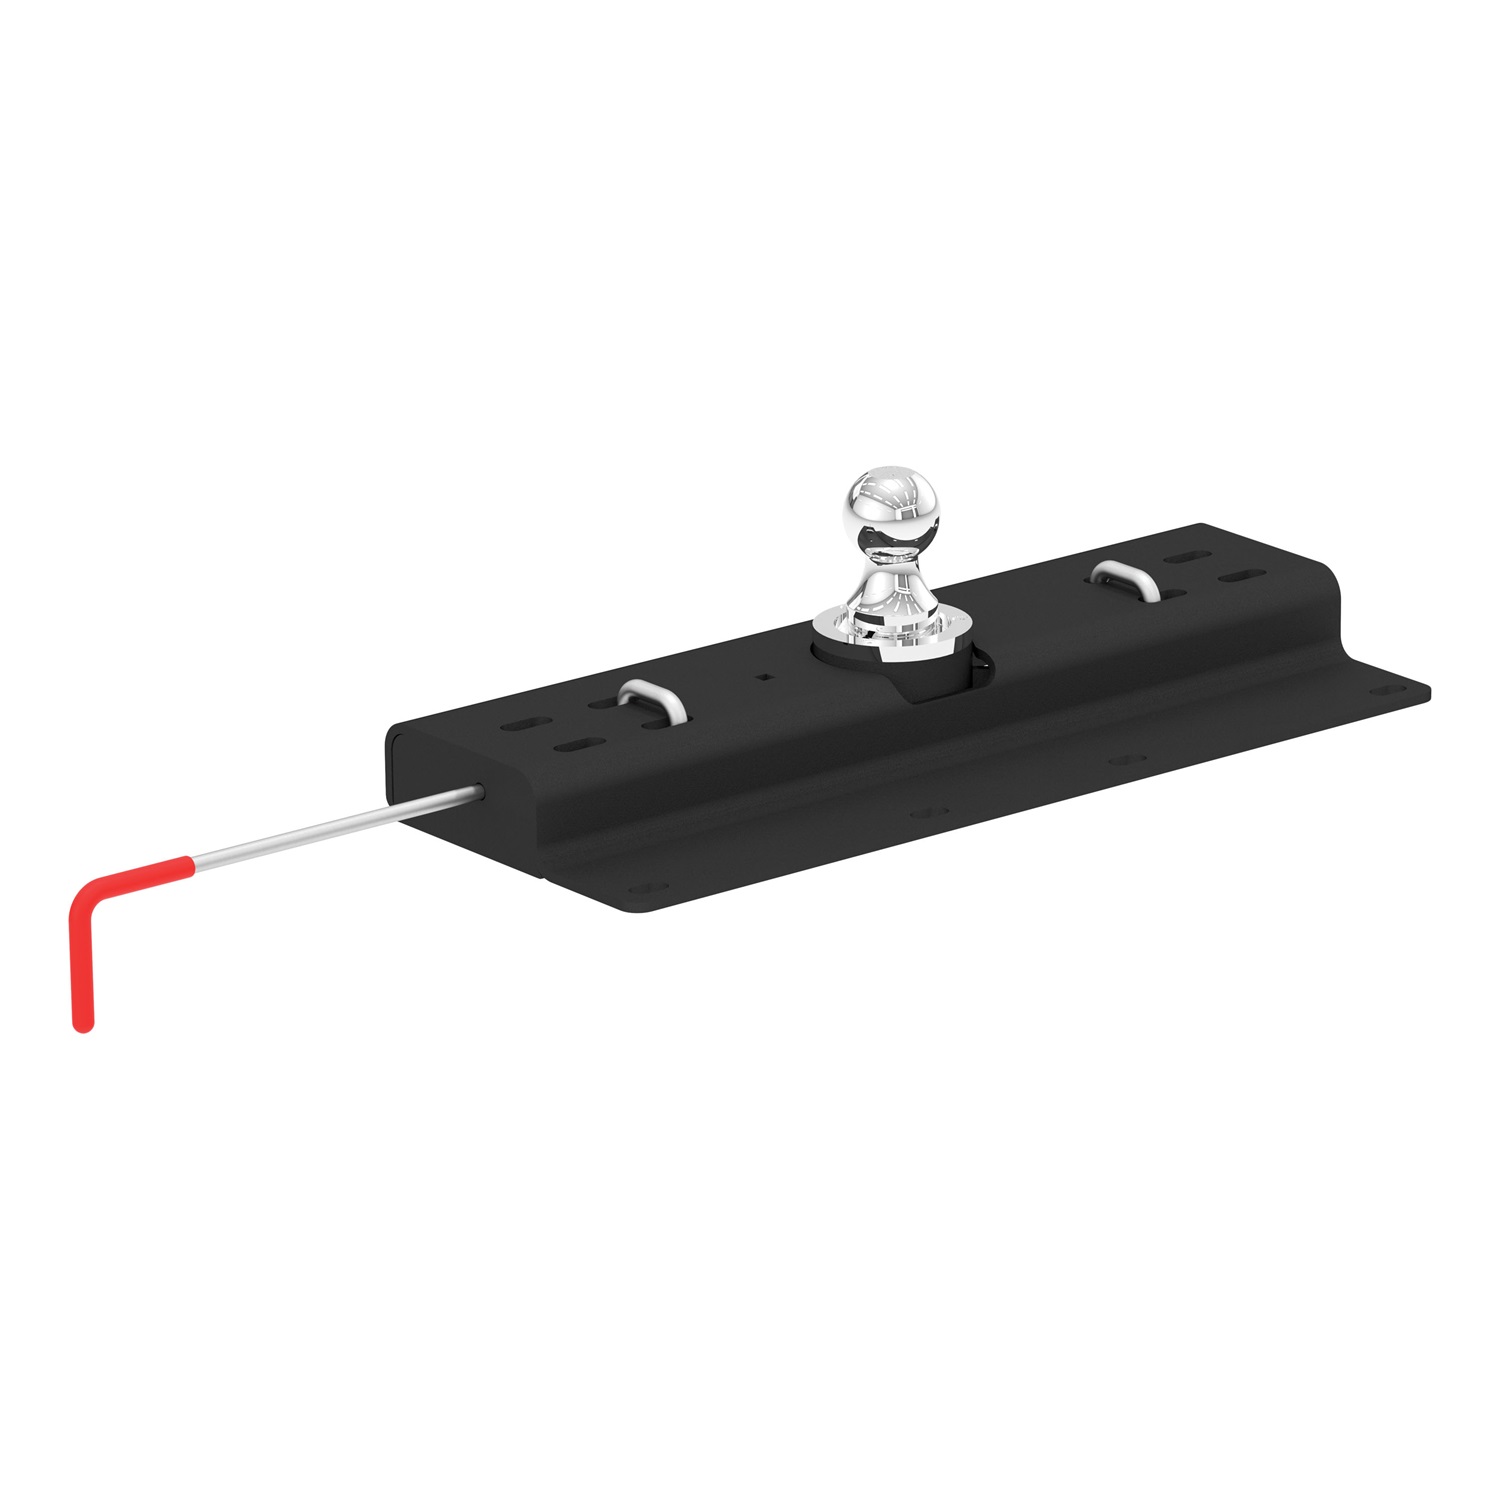 CURT Manufacturing CURT Manufacturing 60615 Under-Bed Double Lock; Gooseneck Hitch